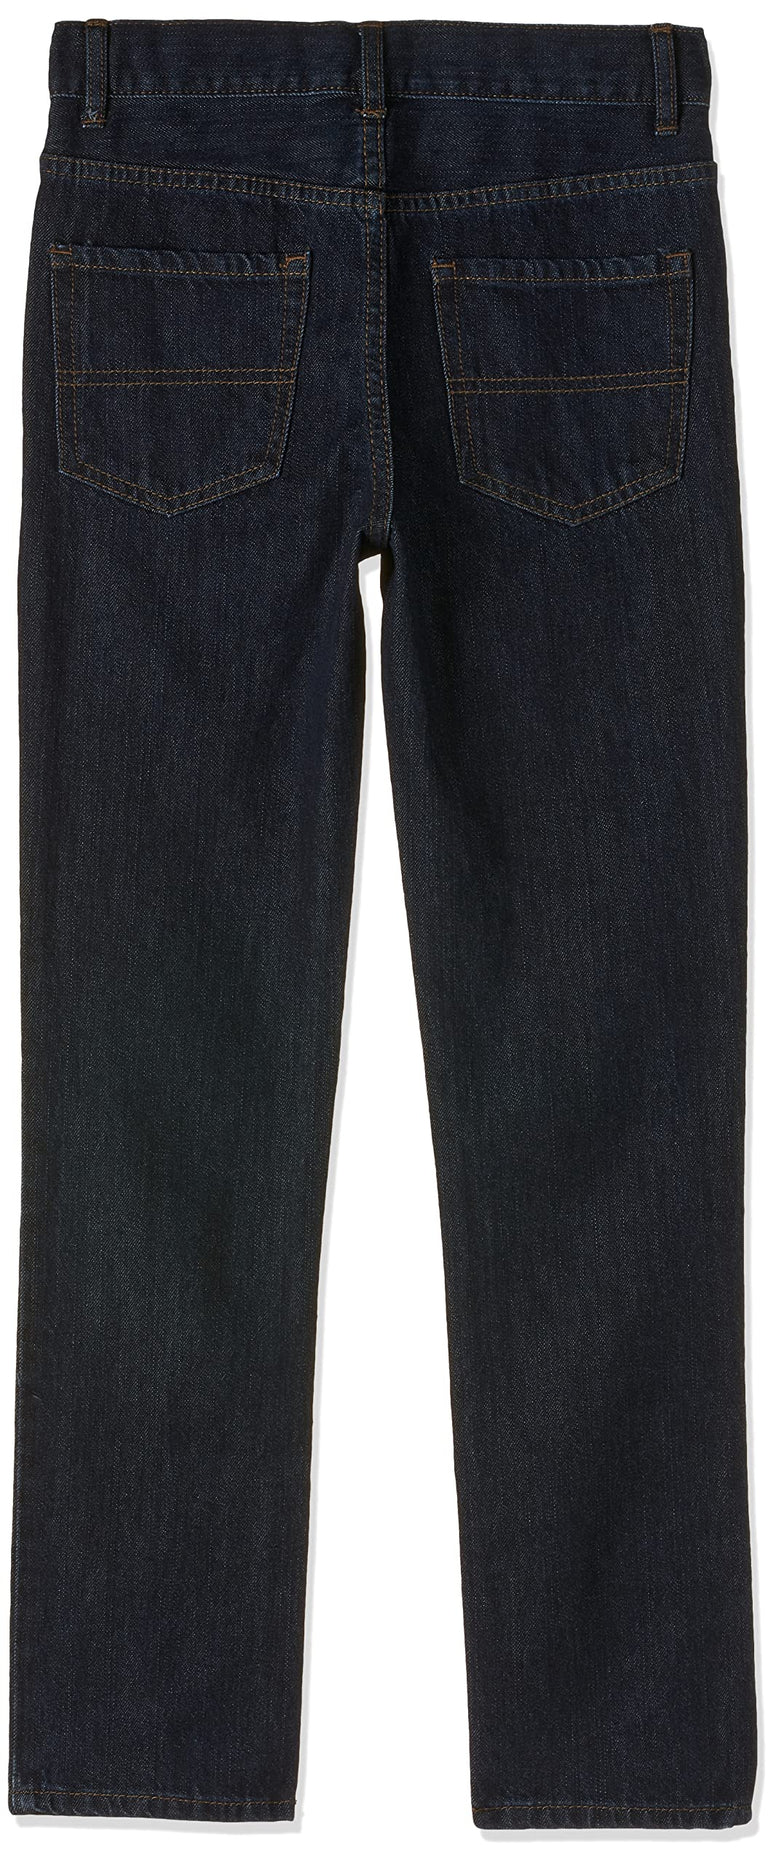 The Children's Place boys Basic Skinny Jeans Jeans